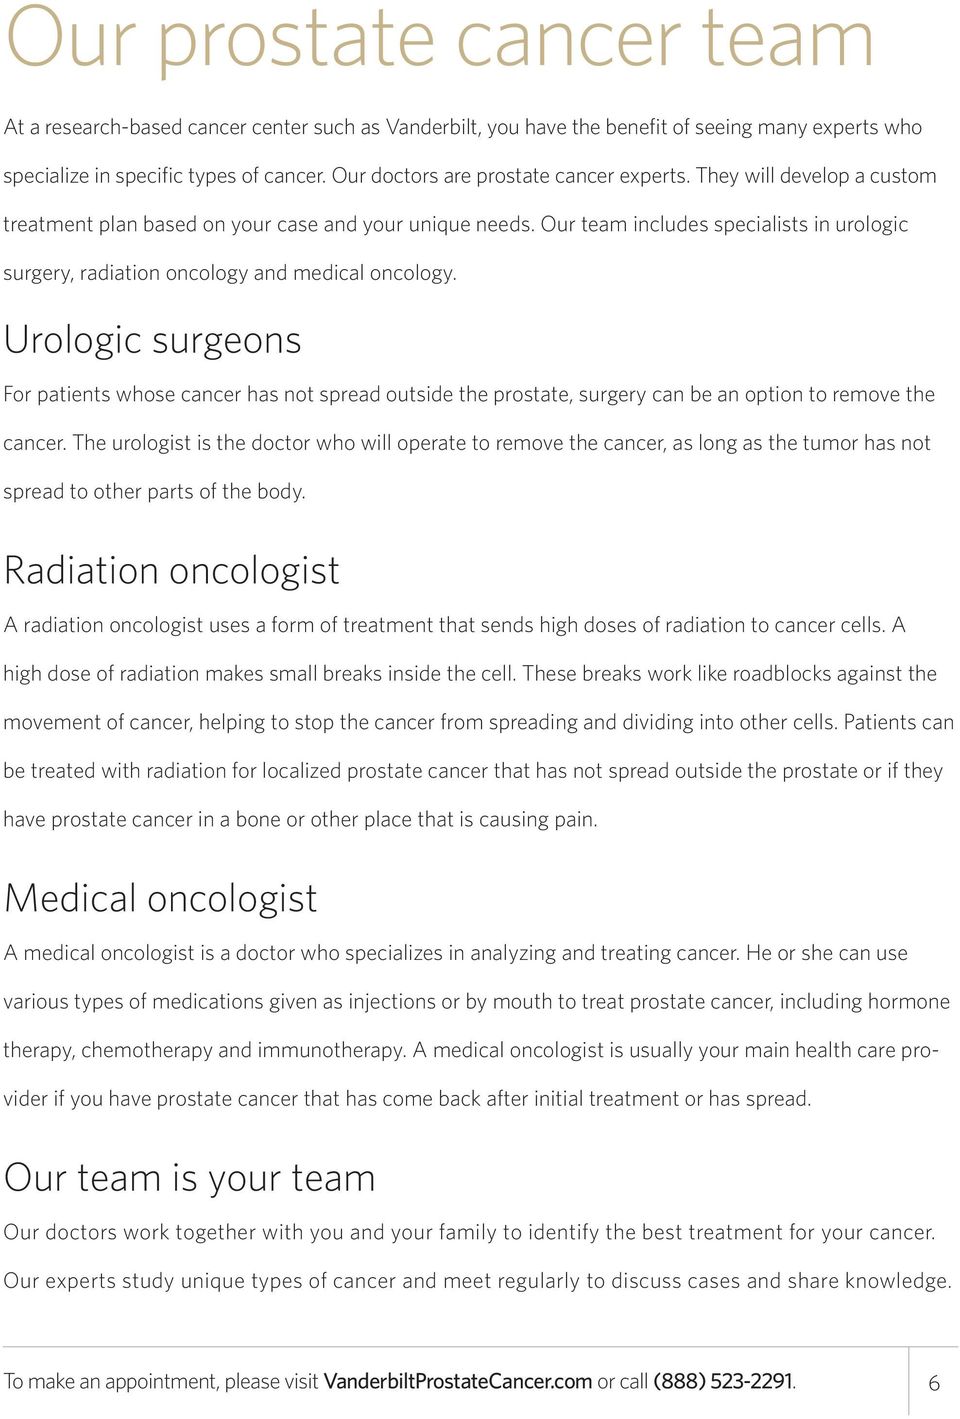 Our team includes specialists in urologic surgery, radiation oncology and medical oncology.